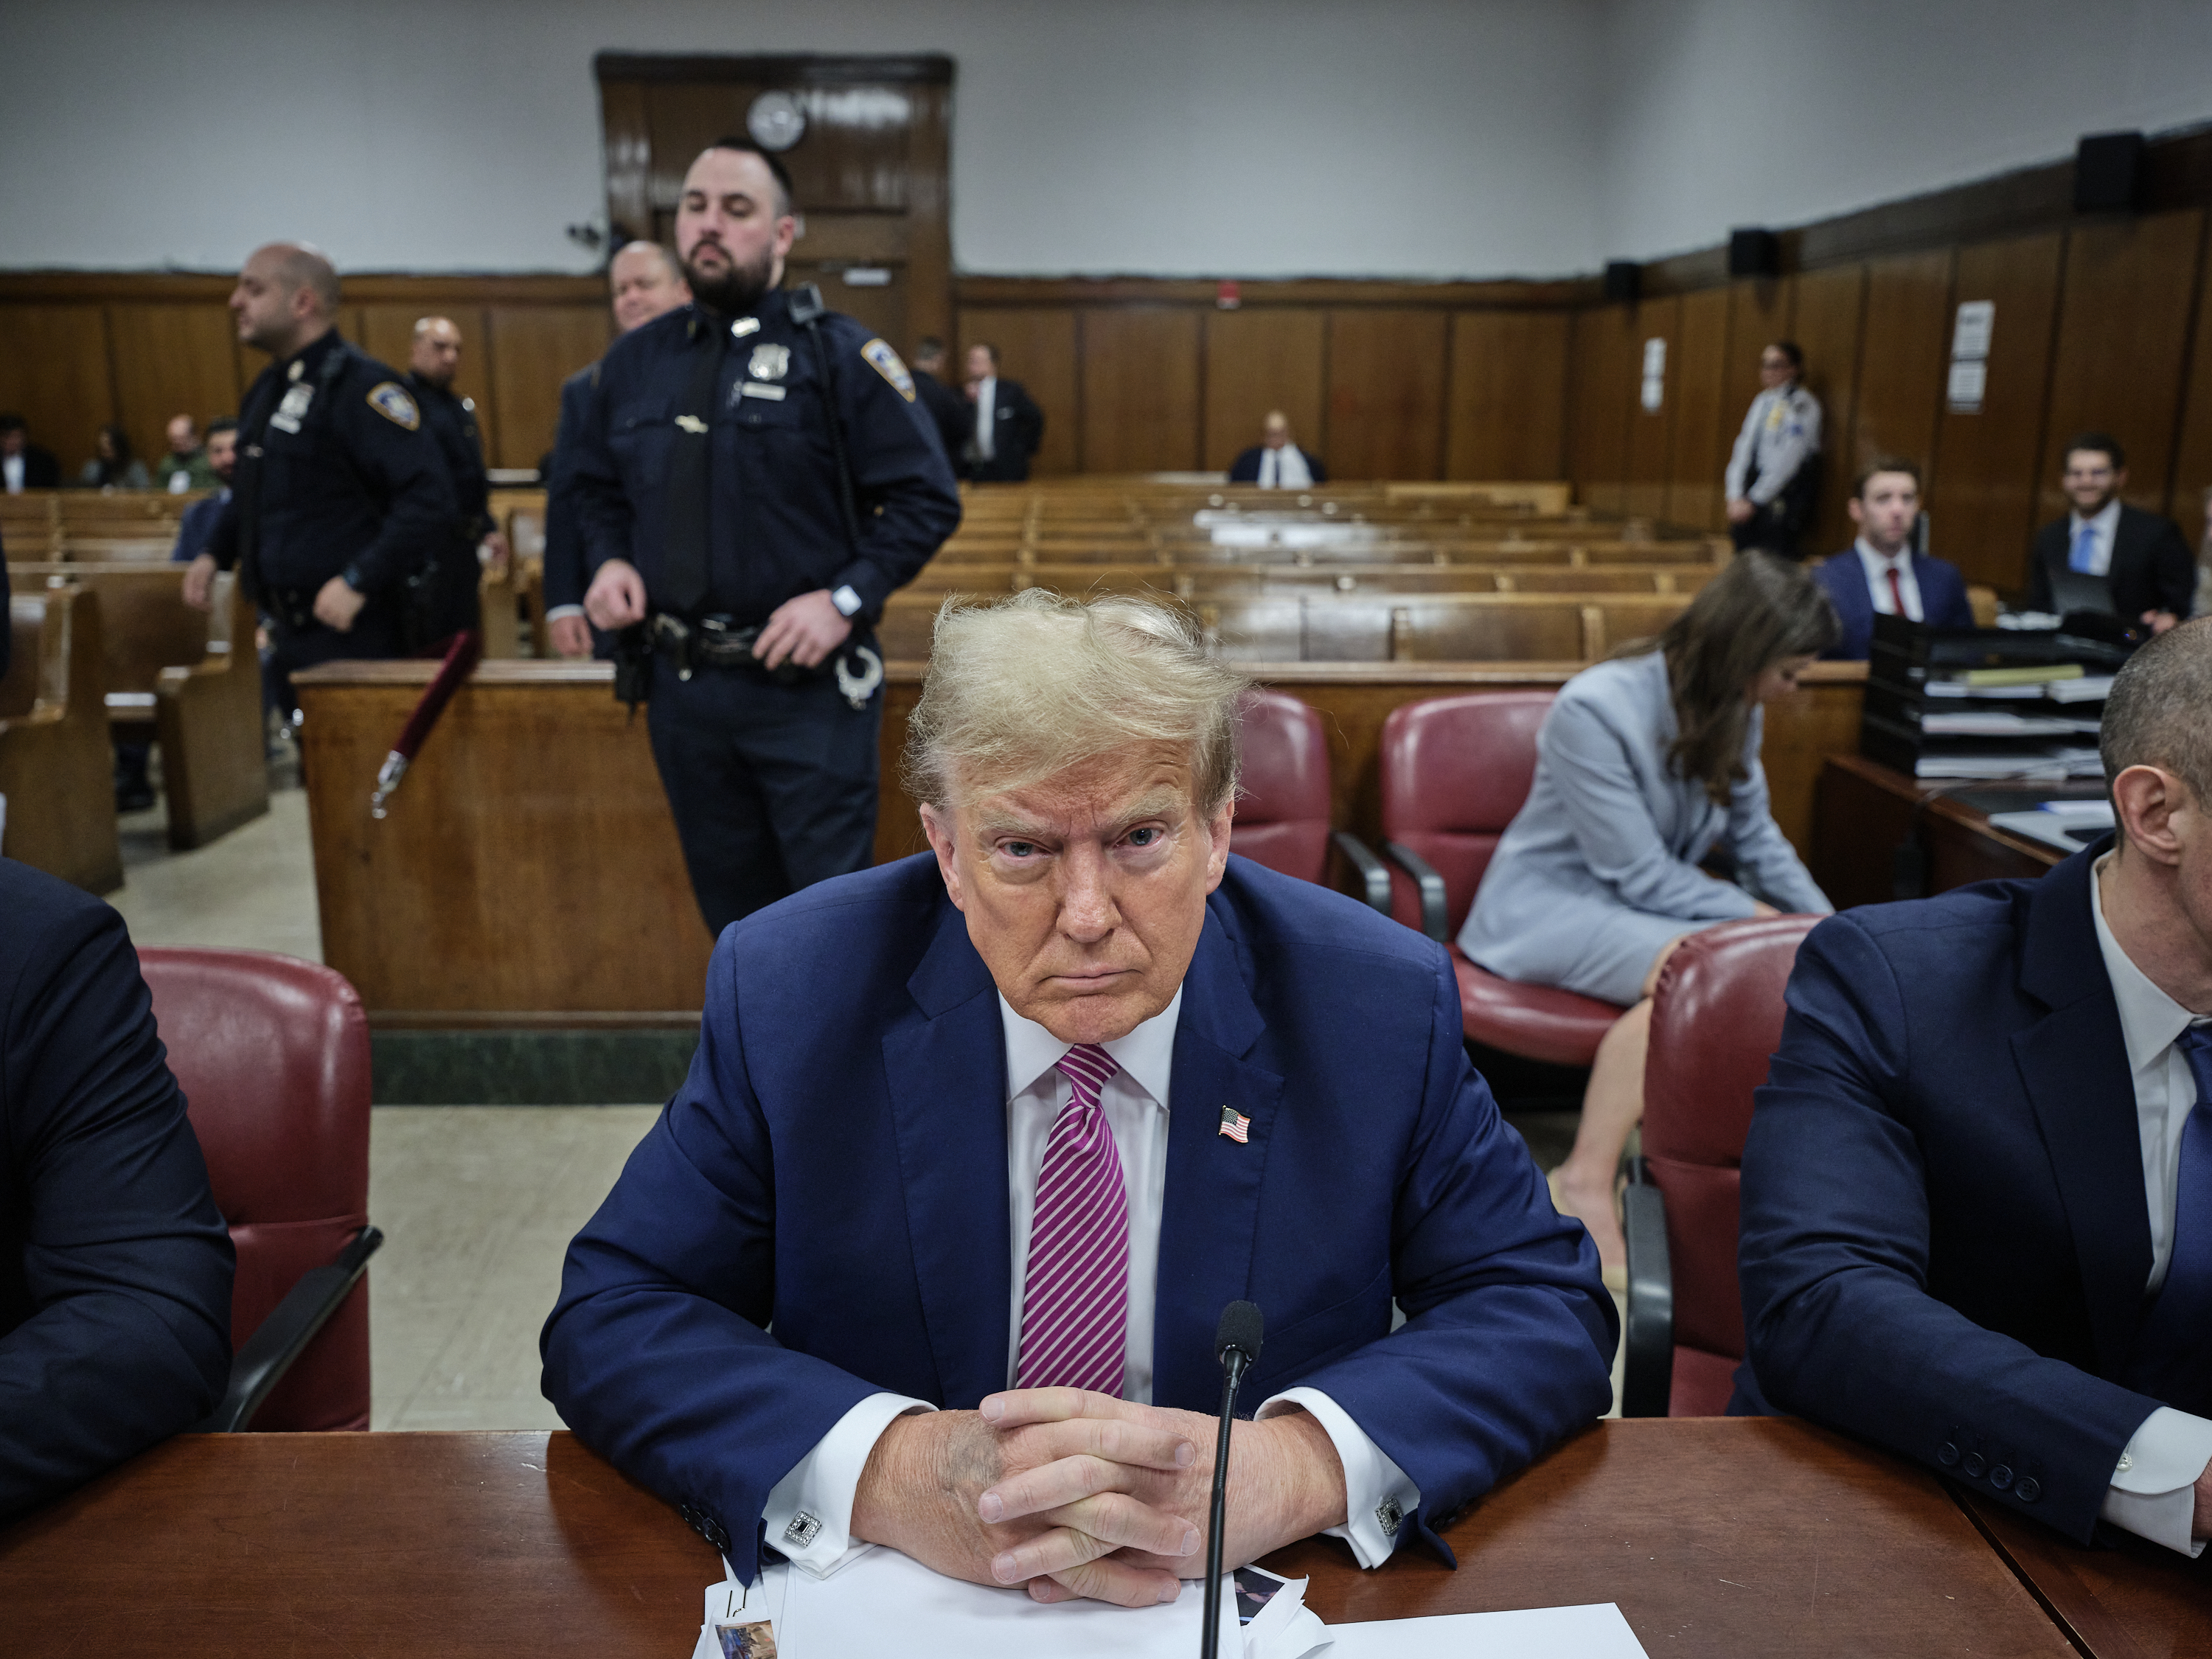 Trump sitting at a table in a courtroom.